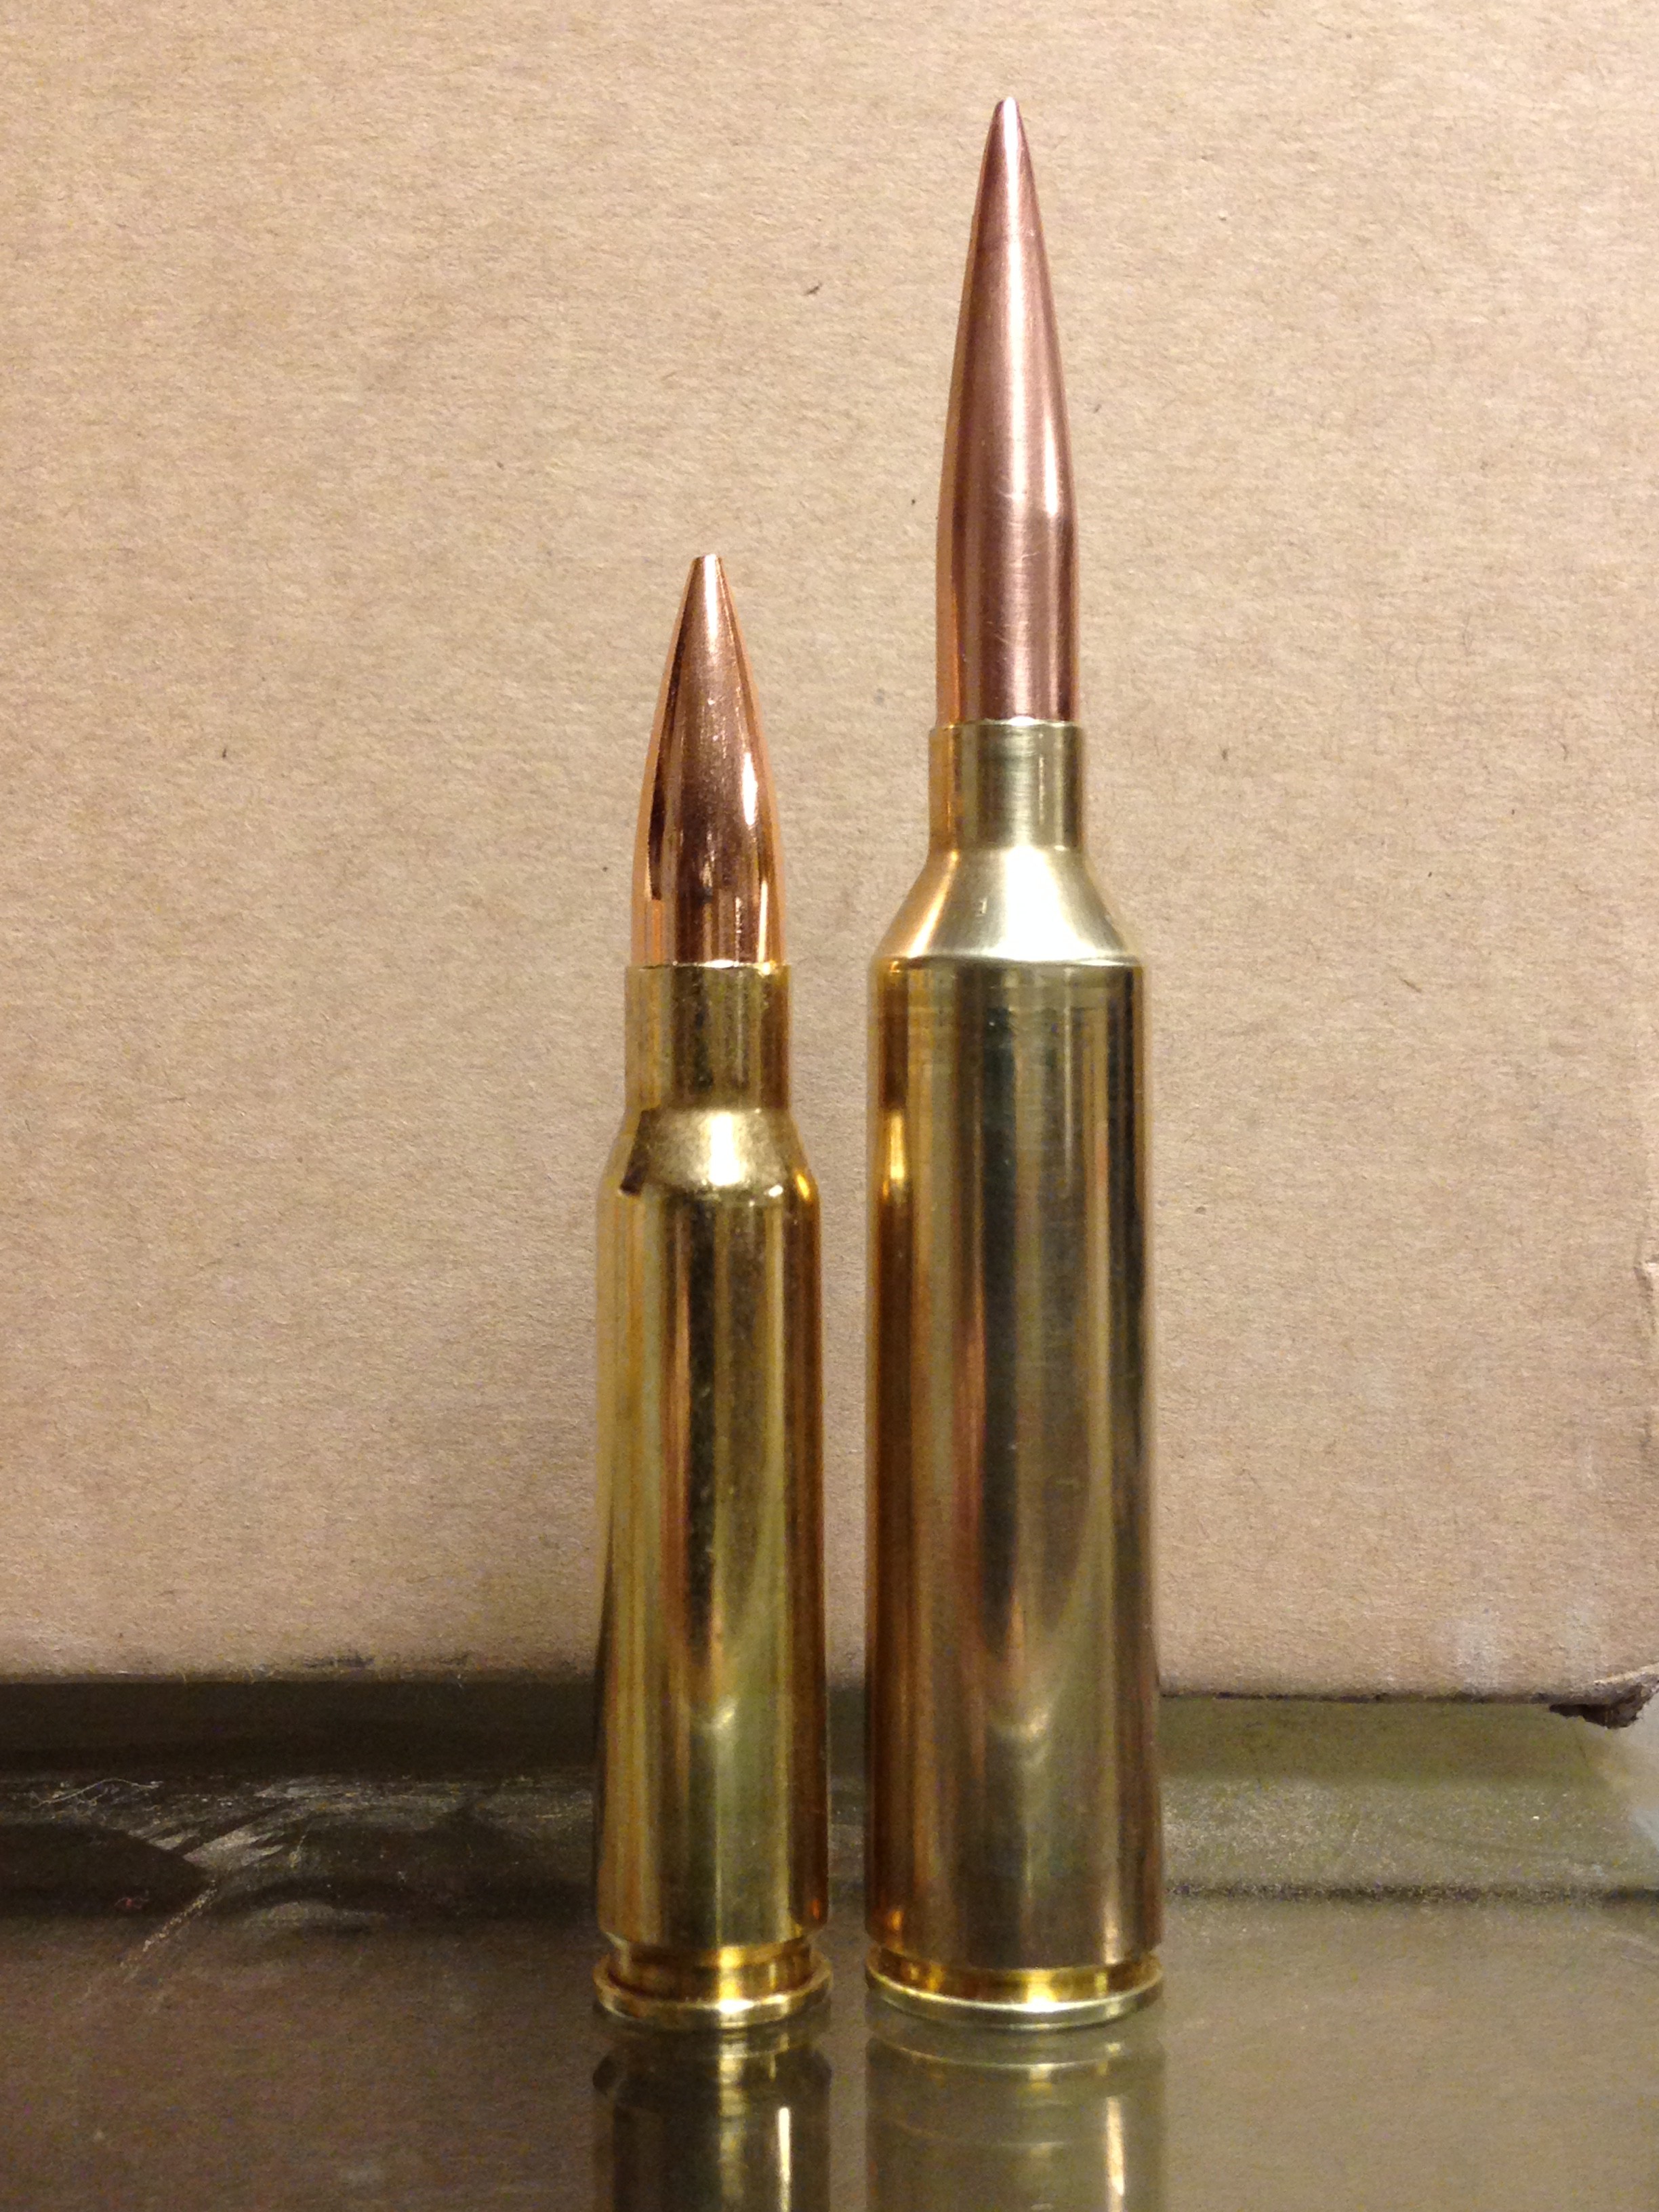 7mm 300 Norma Improved West Texas Ordnance Inc.